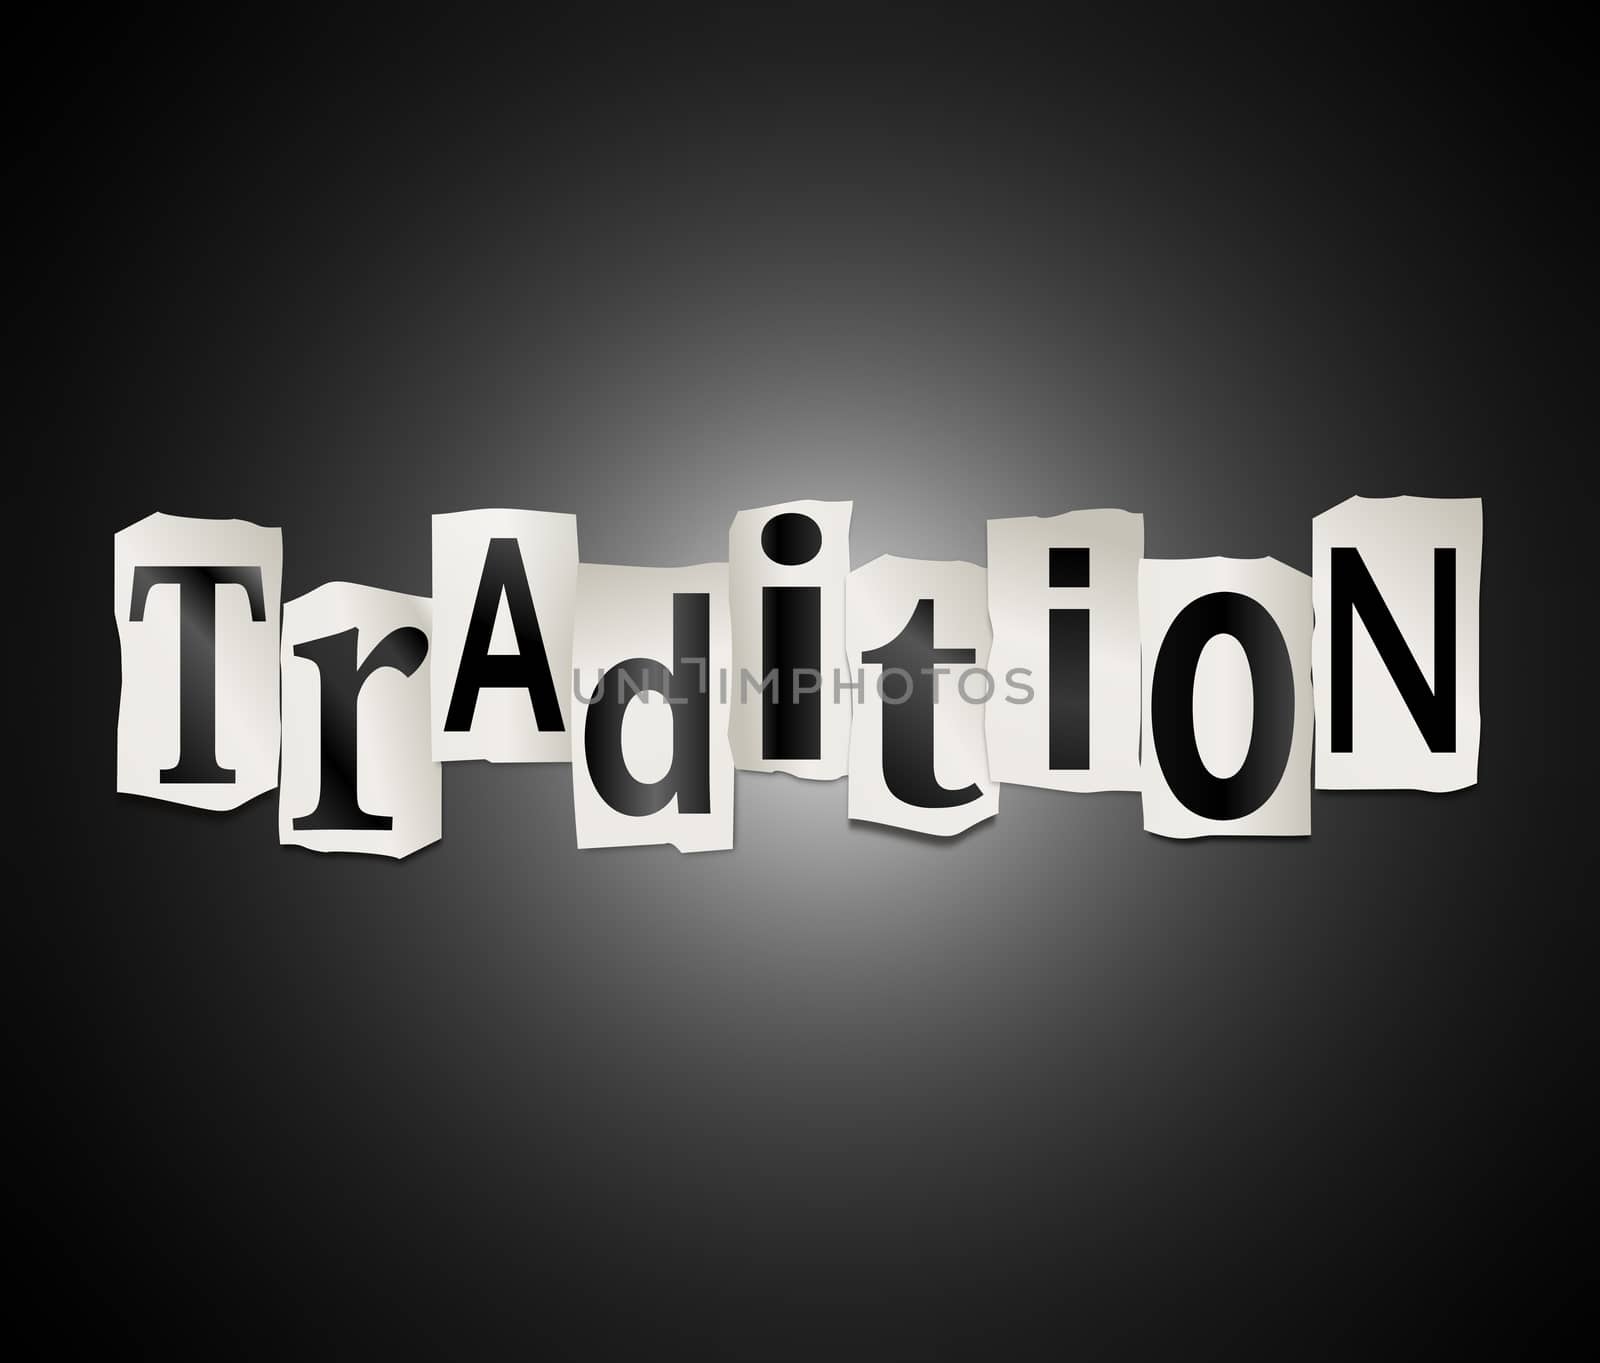 Illustration depicting a set of cut out printed letters arranged to form the word tradition.